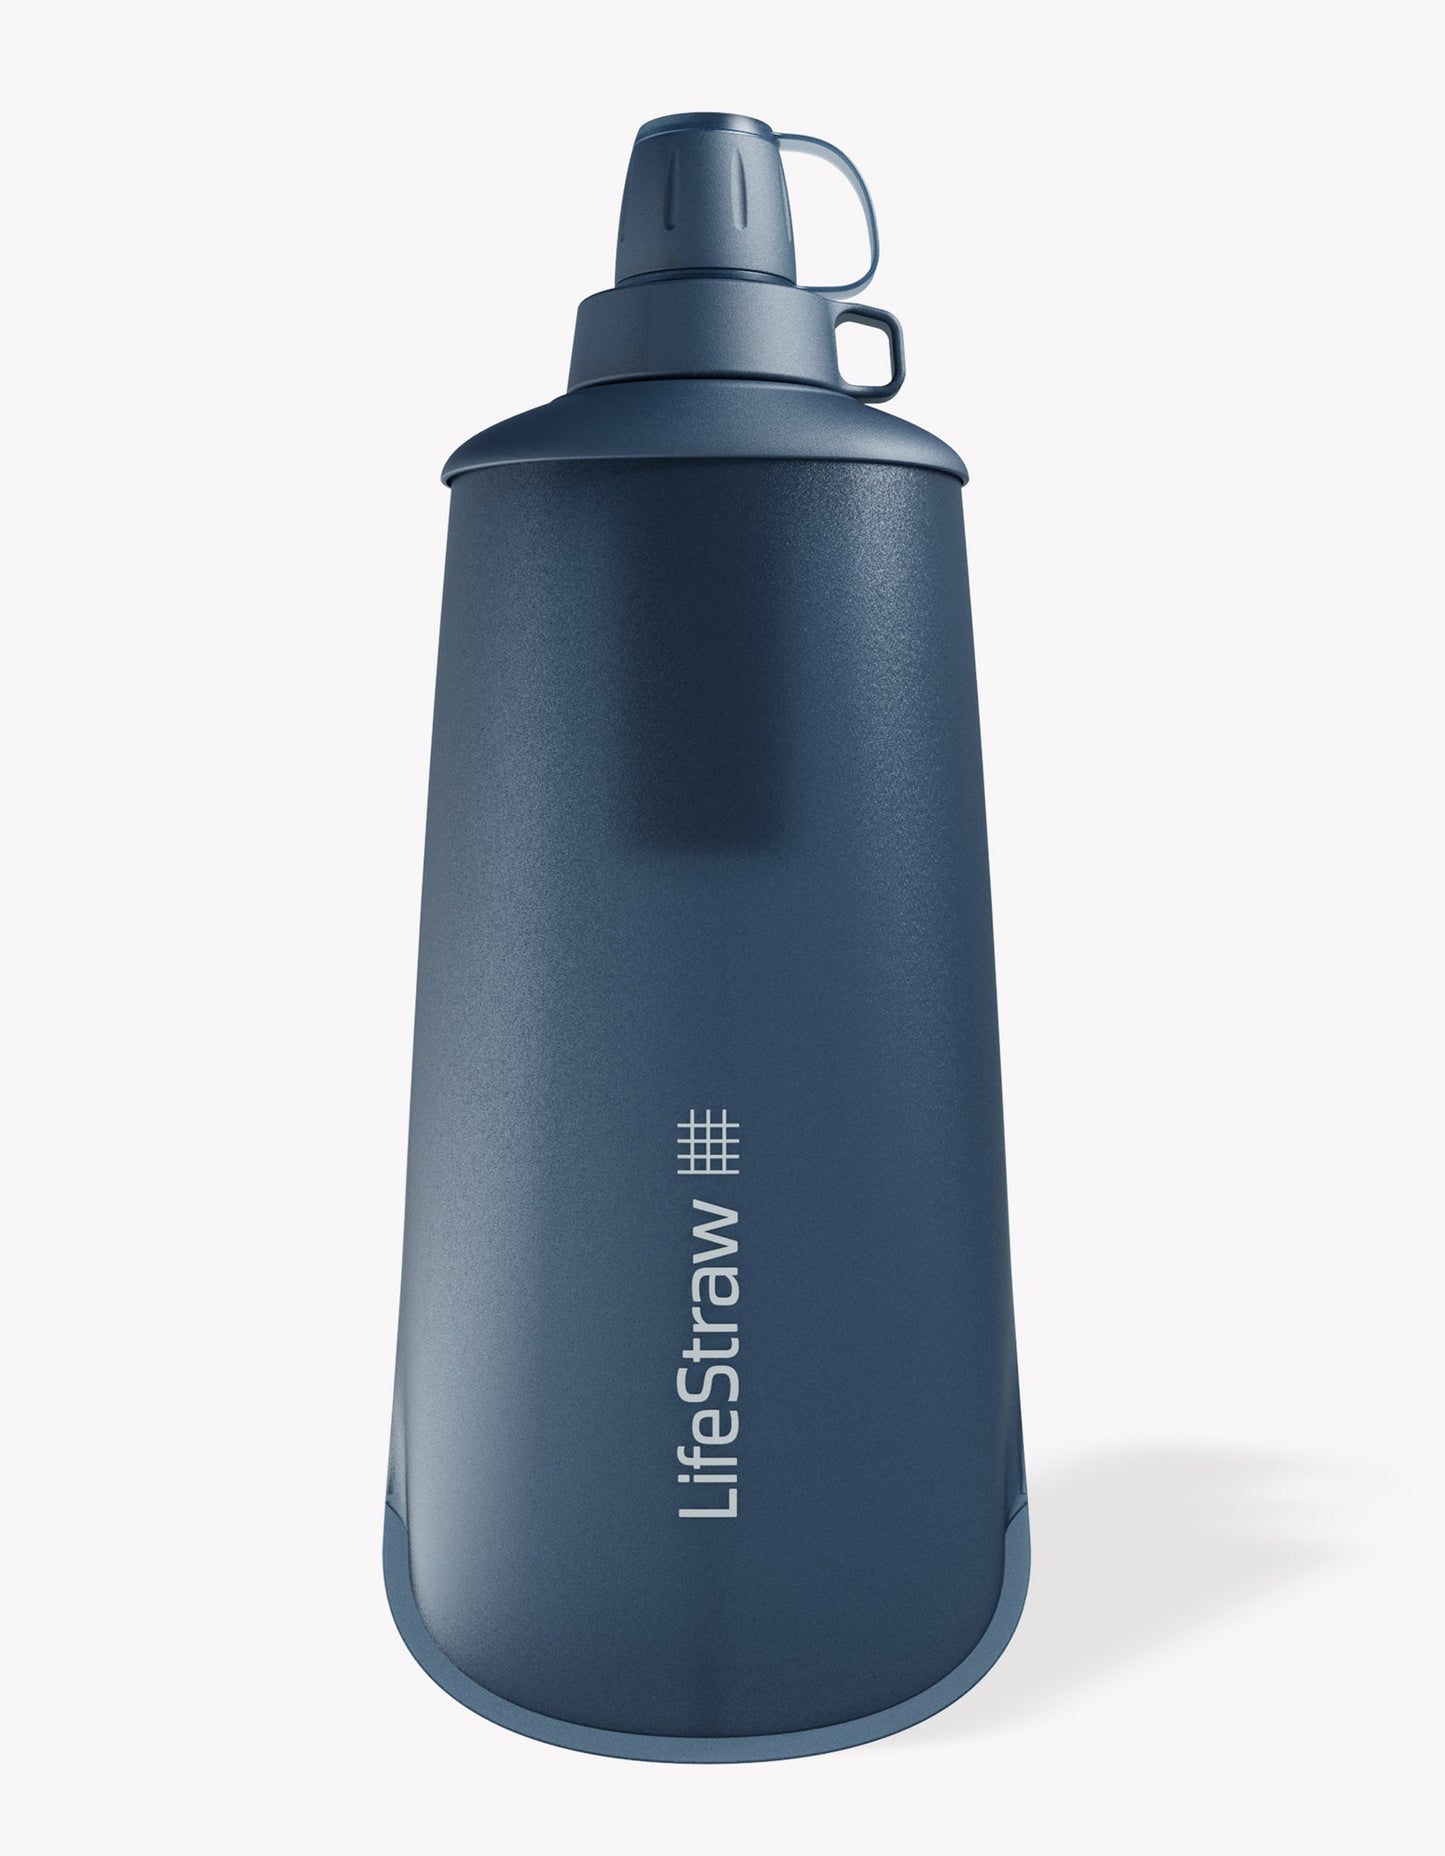 LifeStraw Peak Series Collapsible Squeeze Bottle